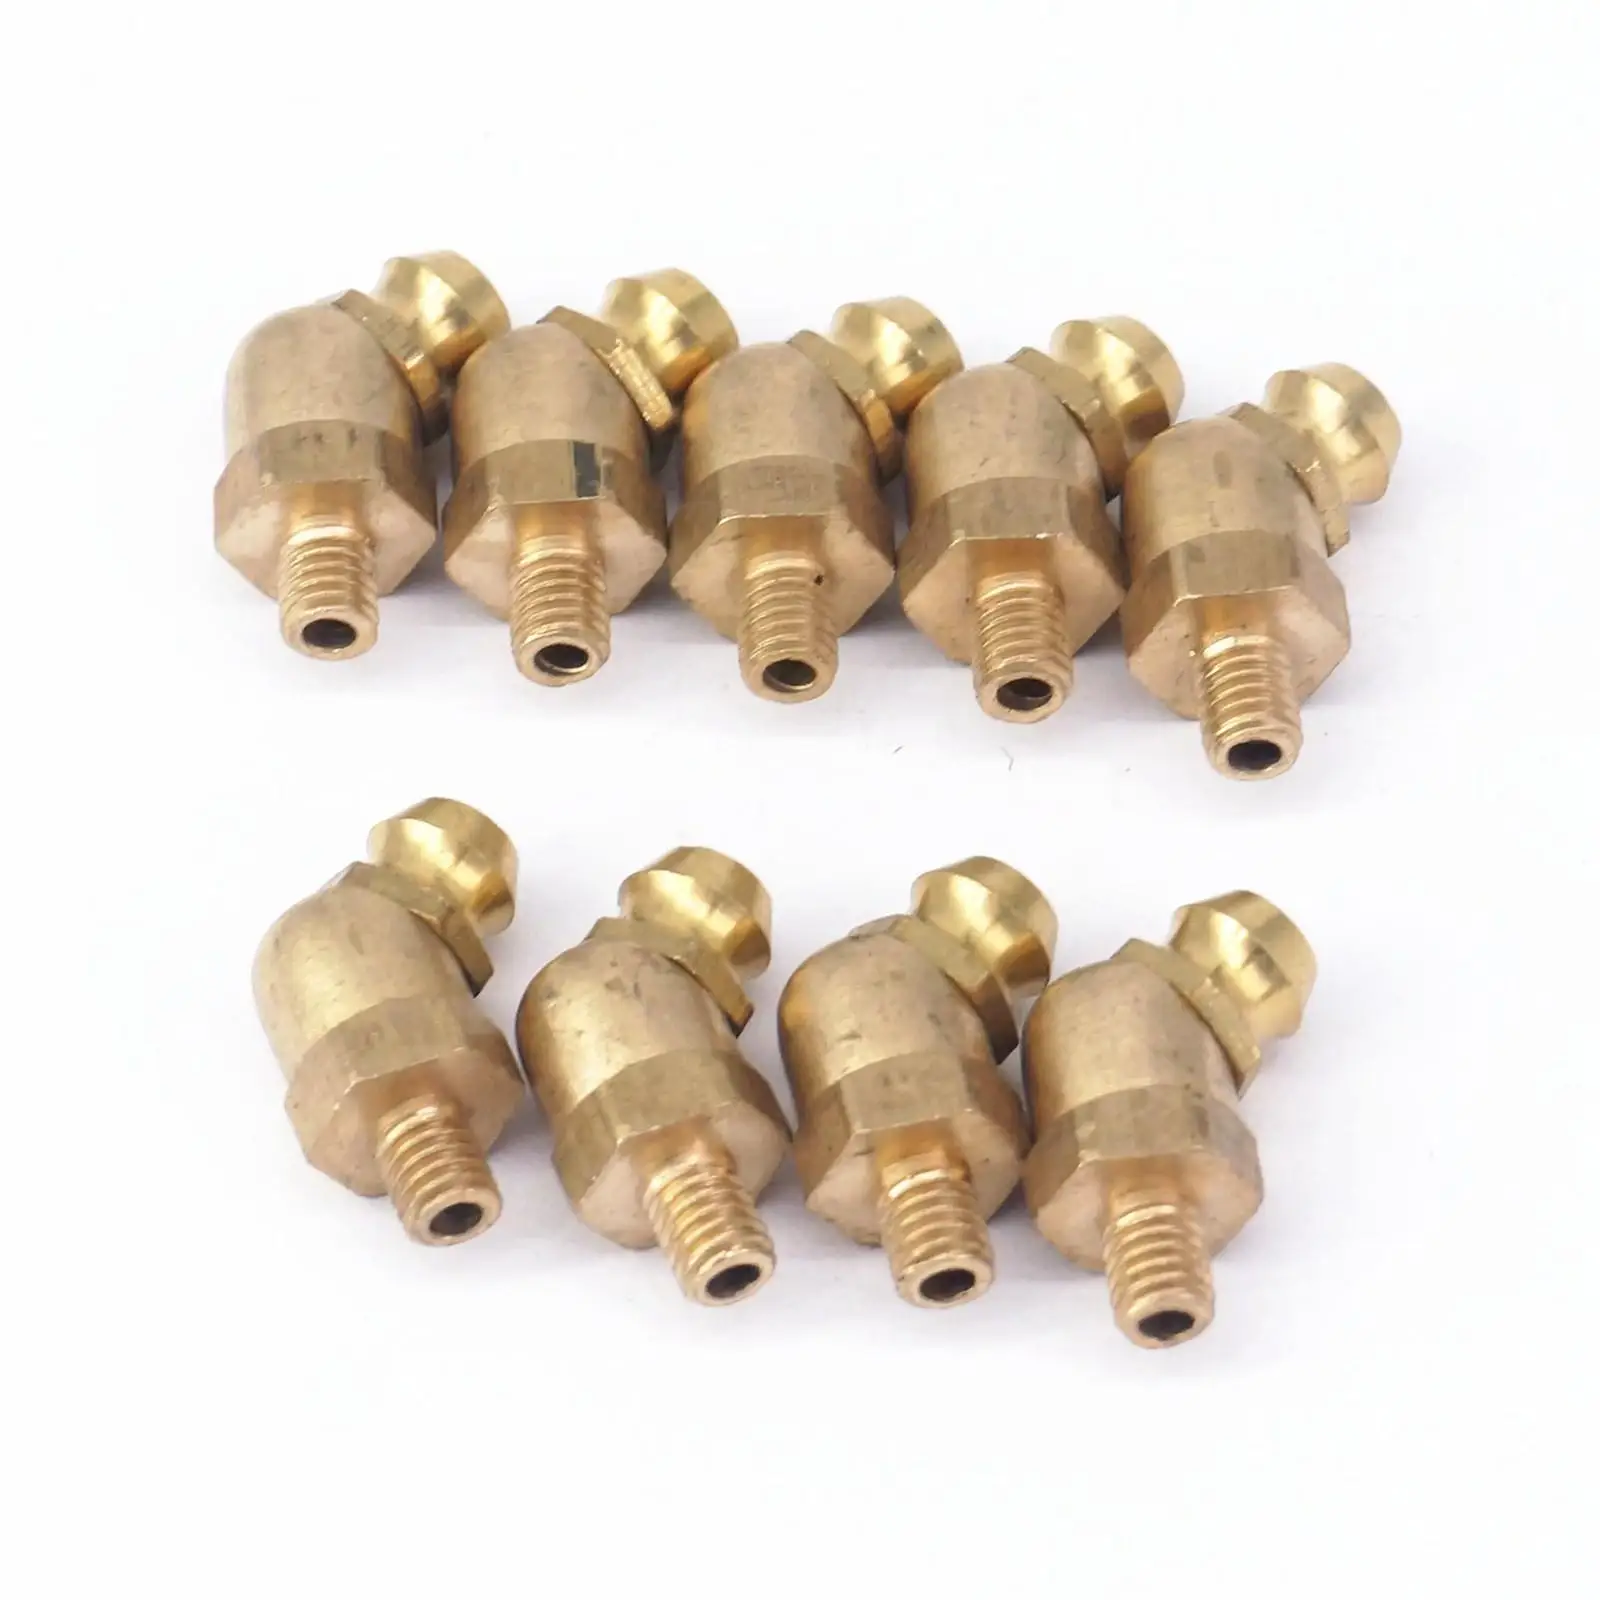 M6 x 0.75mm Metric 45 Degree Stainless Grease Zerk Nipple Fitting For Grease Gun 